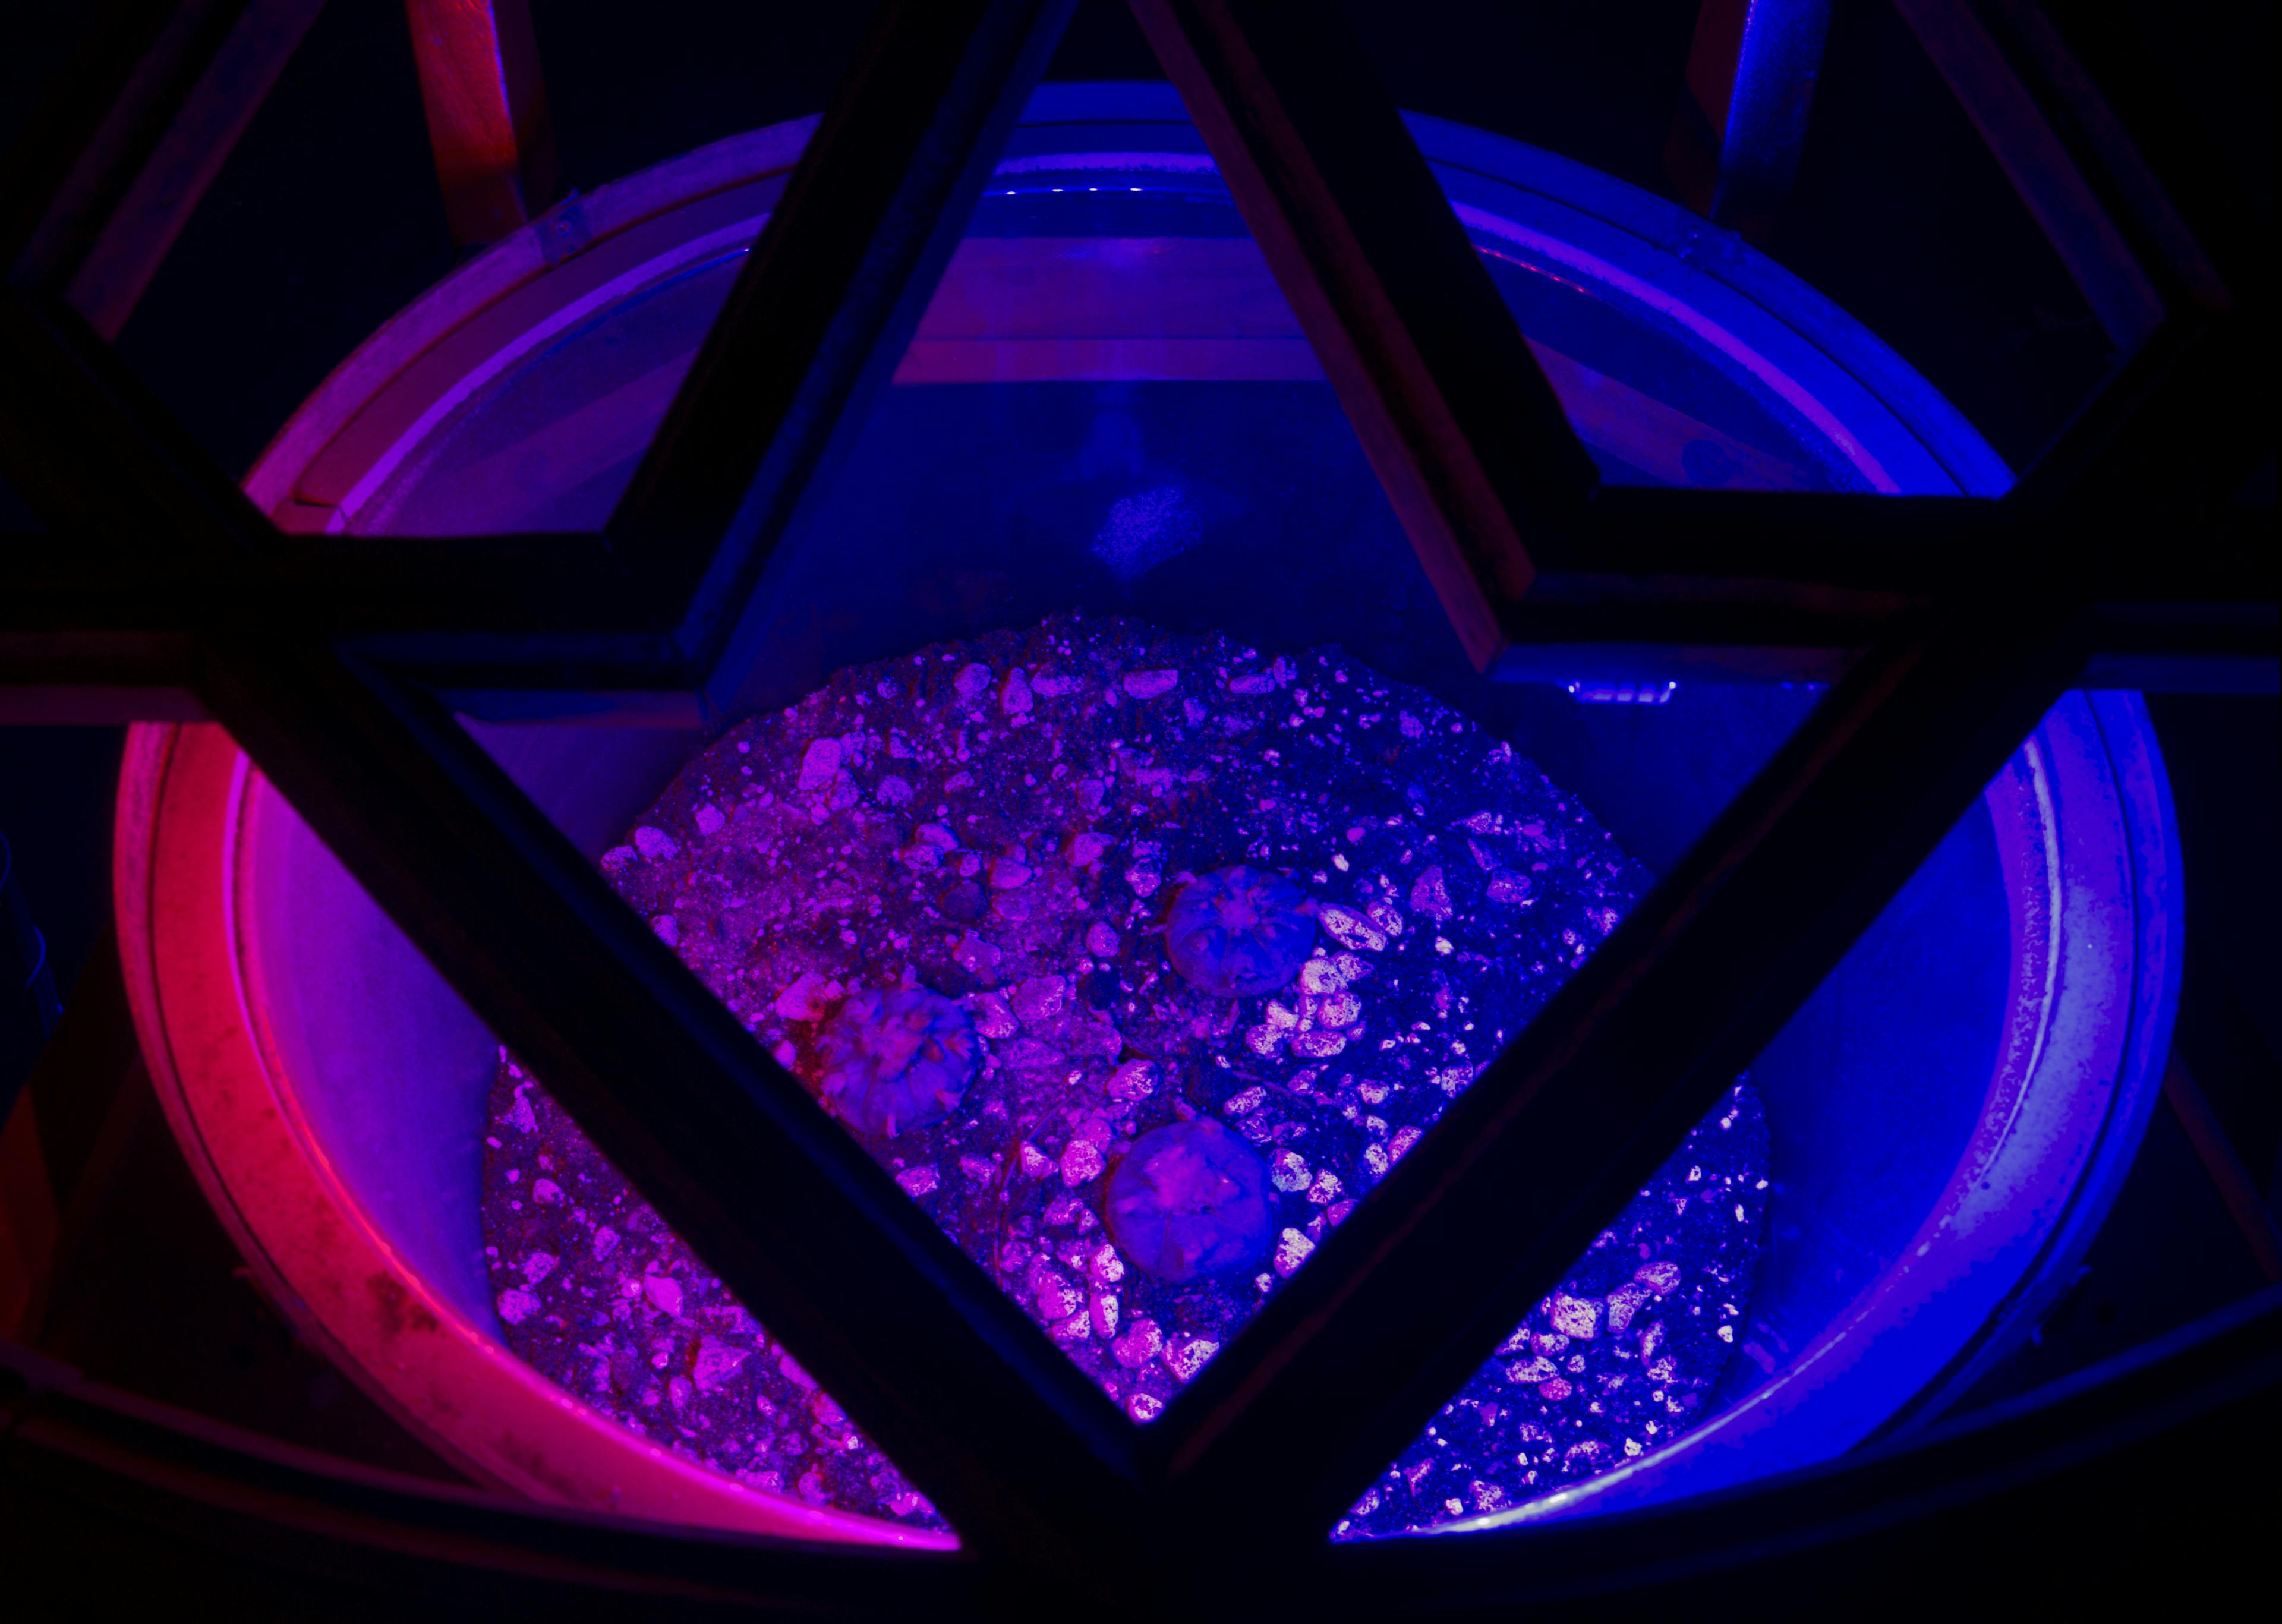 Cacti are planted in a basin filled with dirt lit with blue and pink lights. The image is an overhead view of the cacti through a wooden door arch, which appears silhouetted in front of the lights.